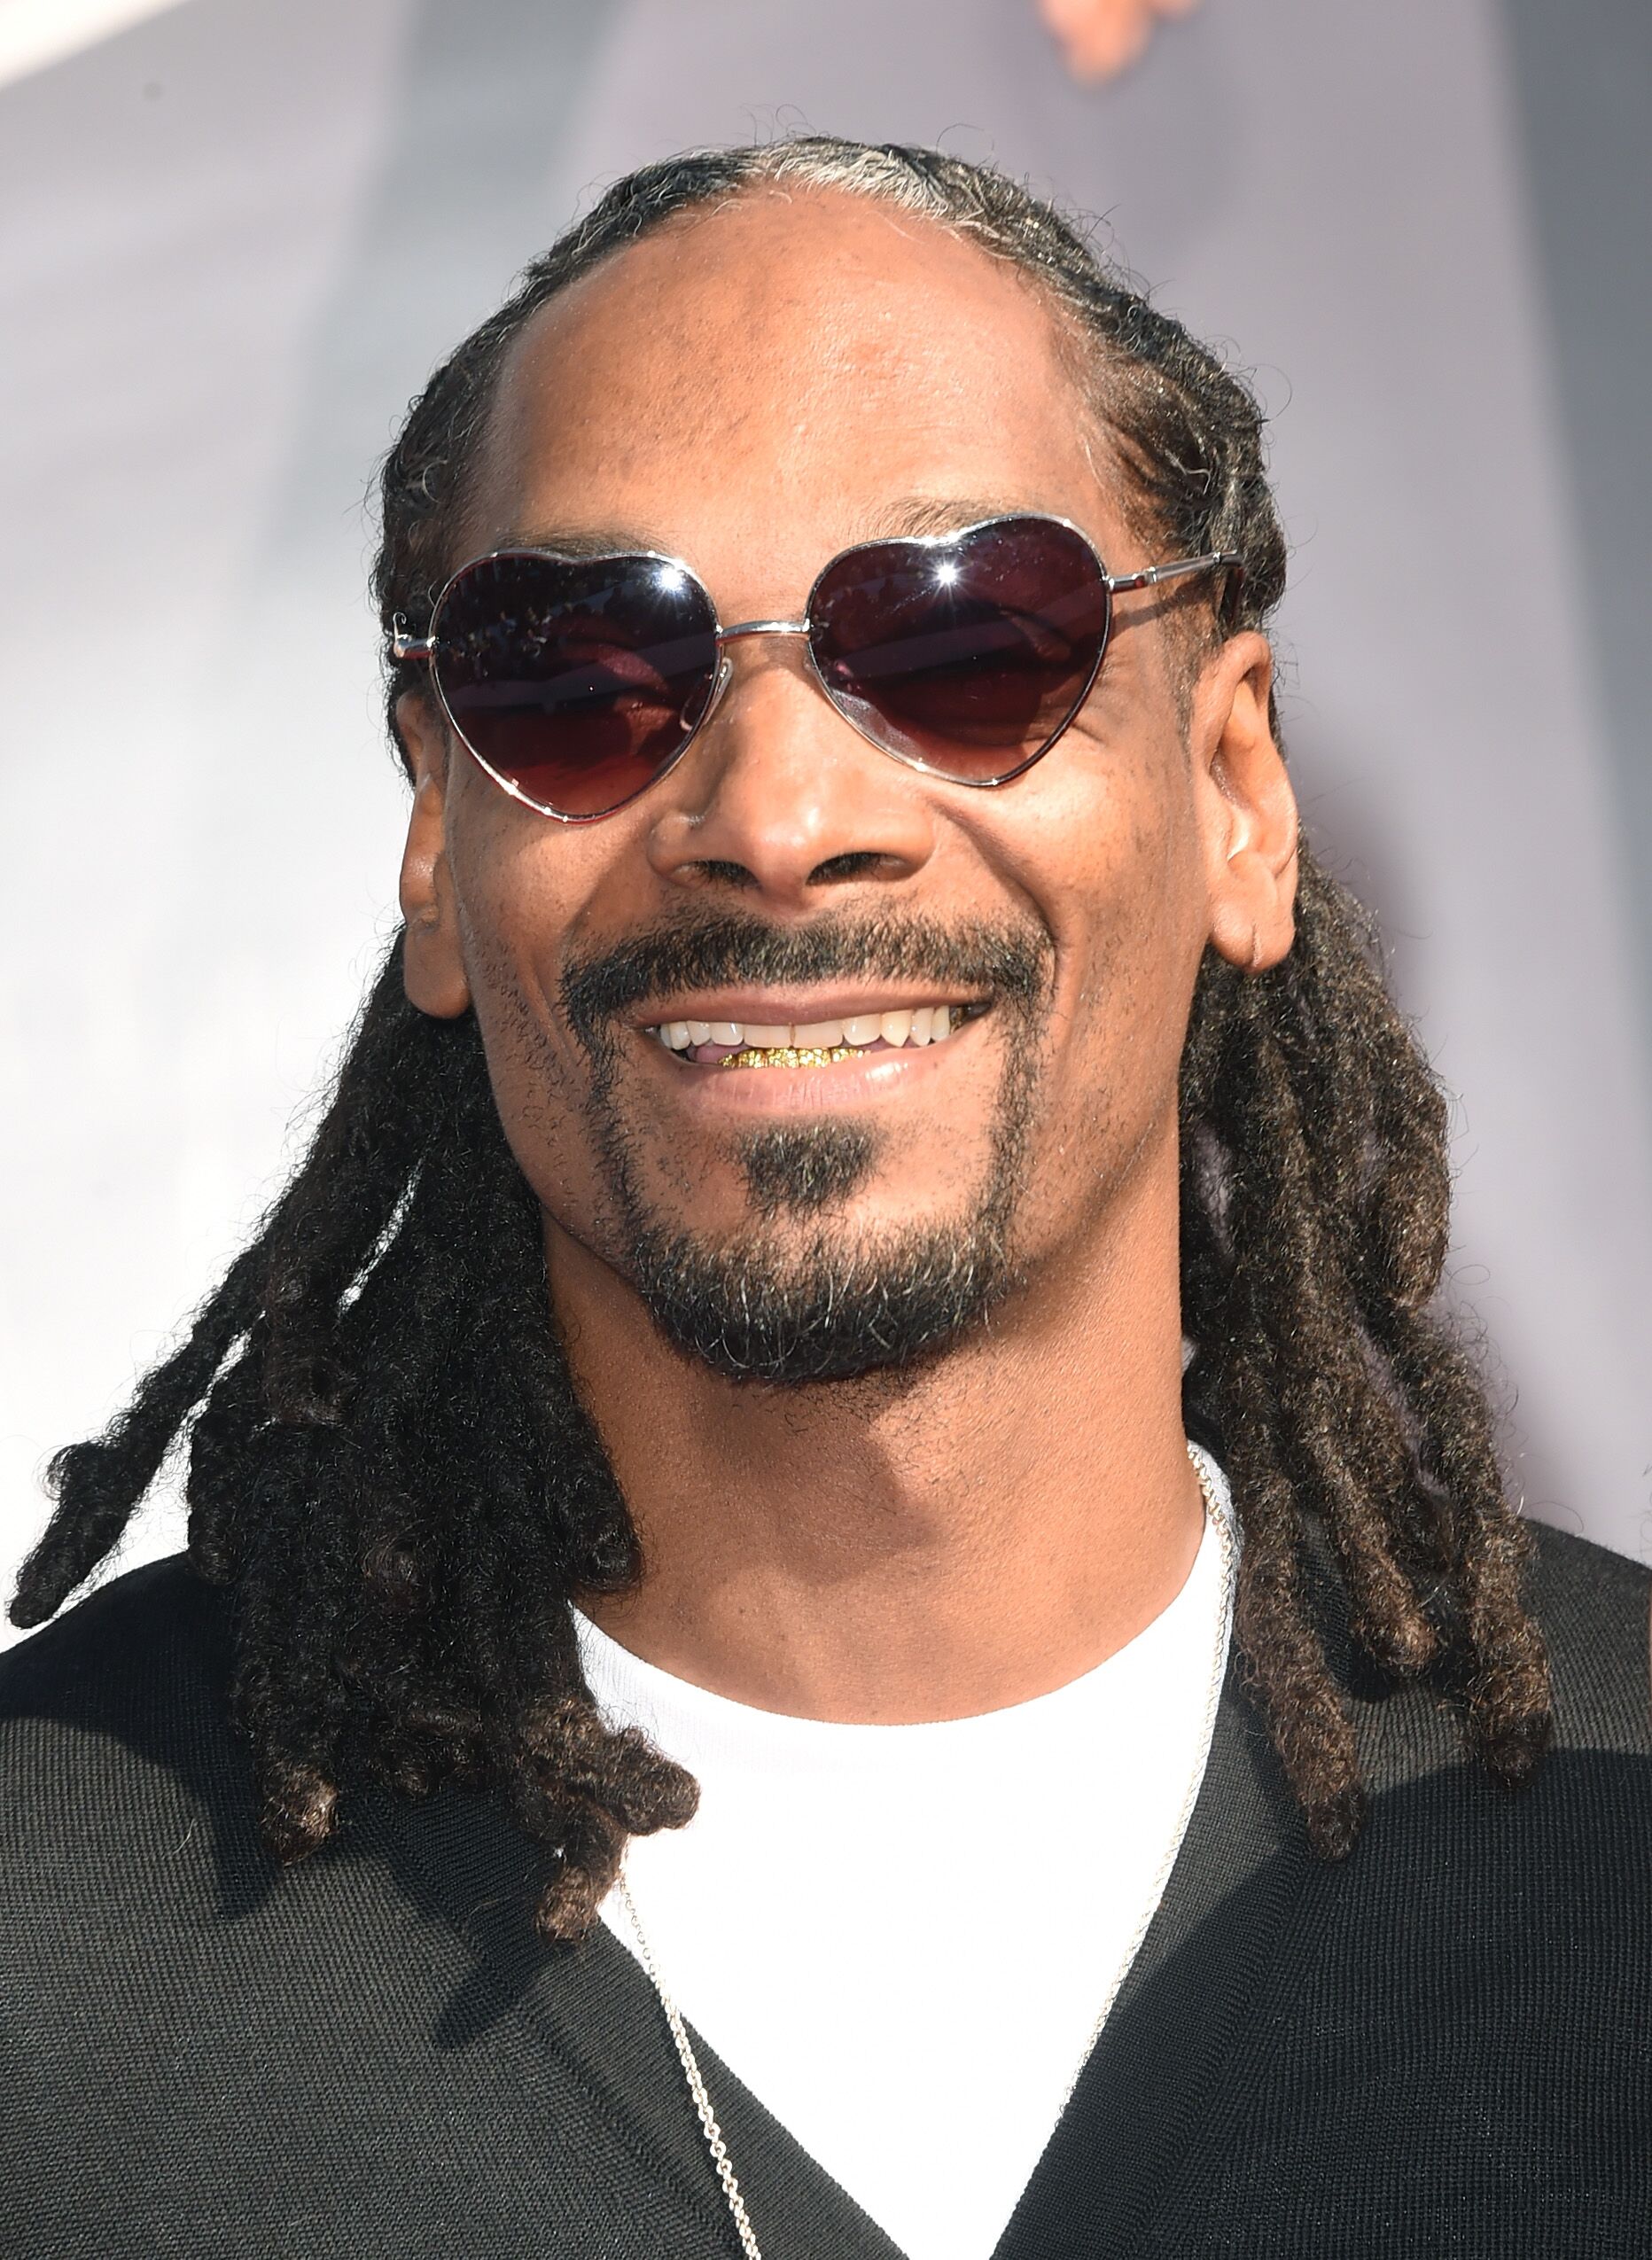 Snoop Dogg attends the 2014 MTV Video Music Awards at The Forum on August 24, 2014 in Inglewood, California | Photo: Getty Images 